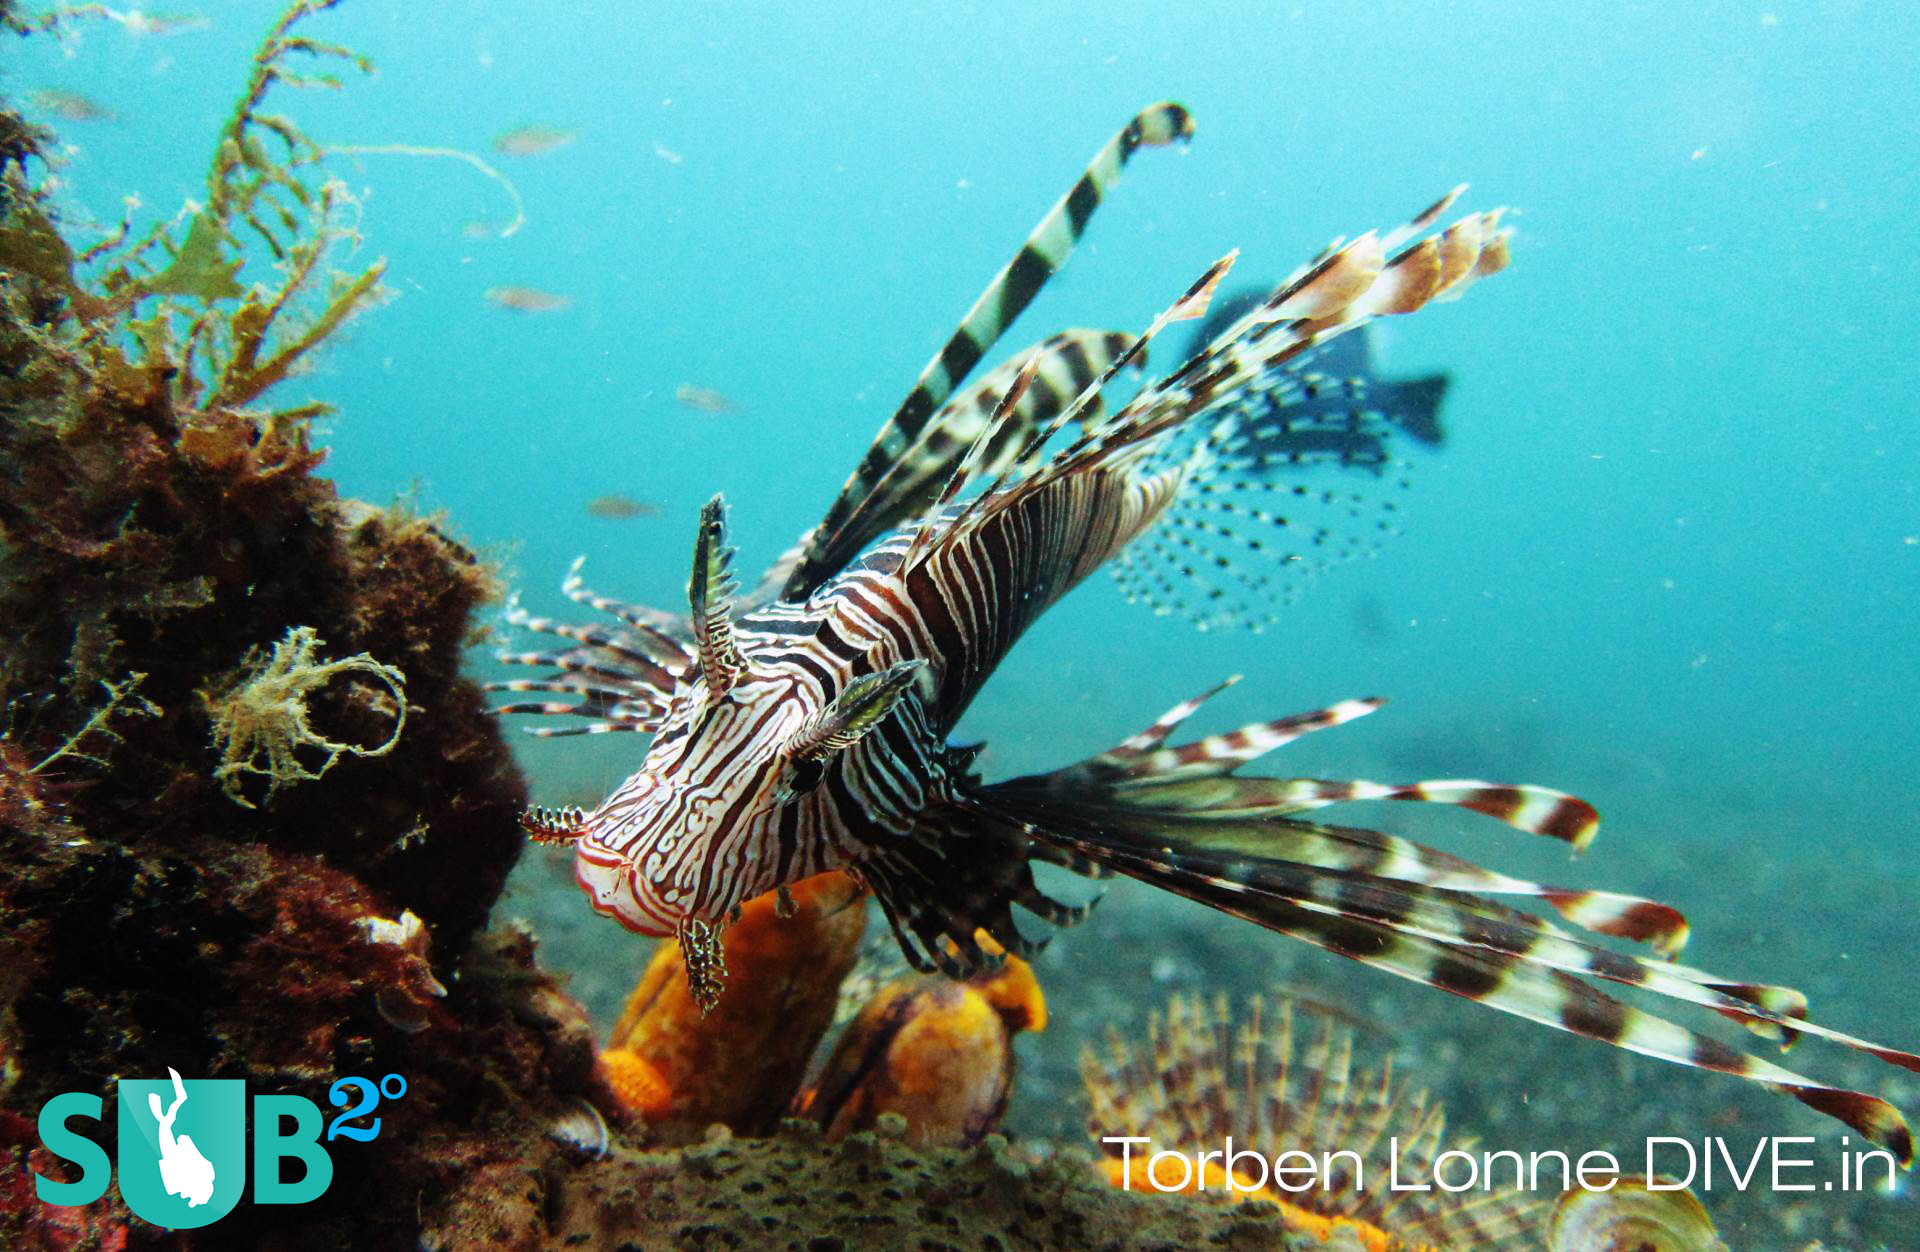 The lionfish is venomous and one of the most ravenous predators in the underwater world.